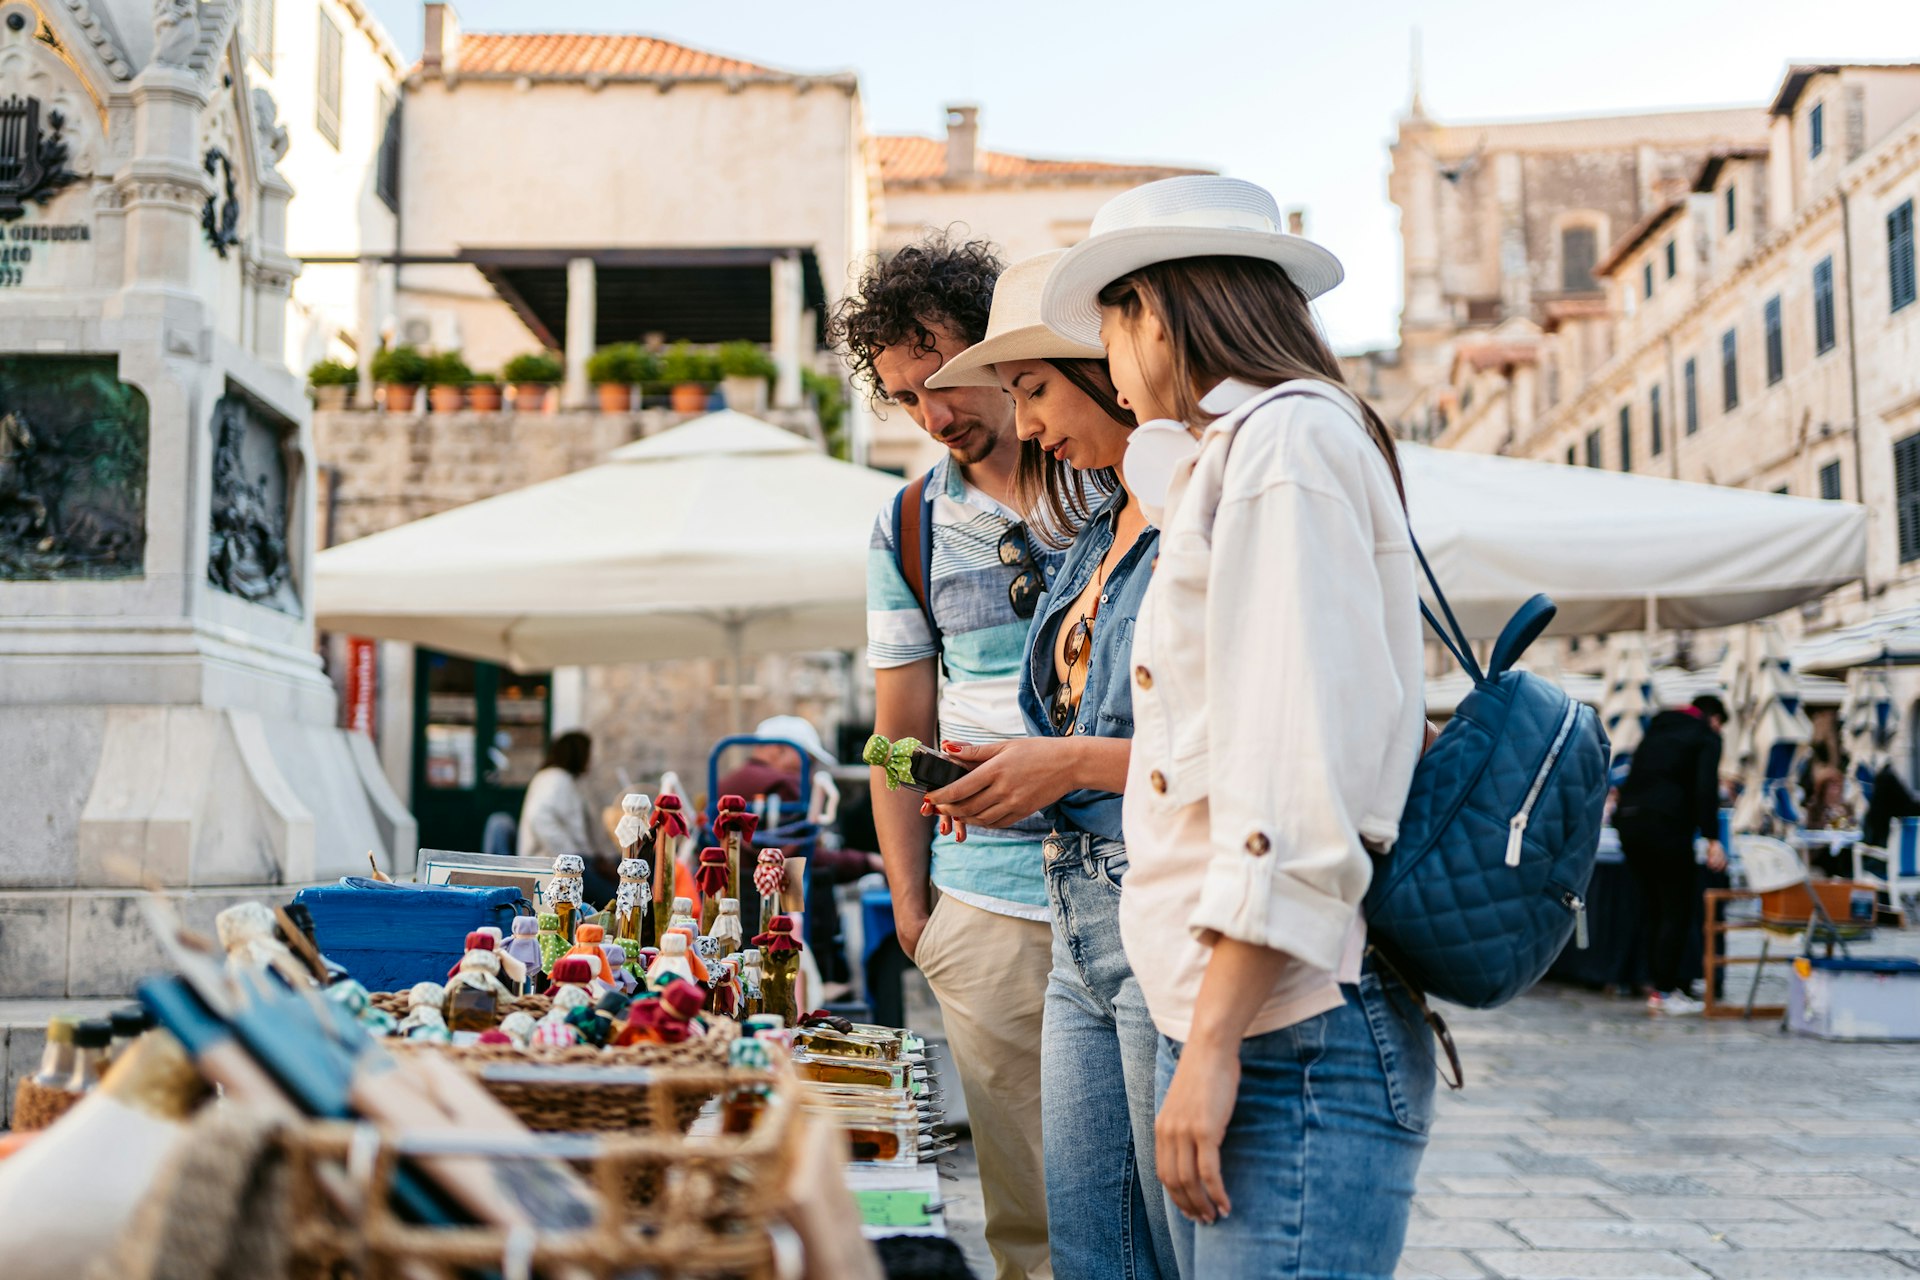 Three young tourists looking at the homemade liquors sold by the street vendors on the street in Dubrovnik in Croatia.